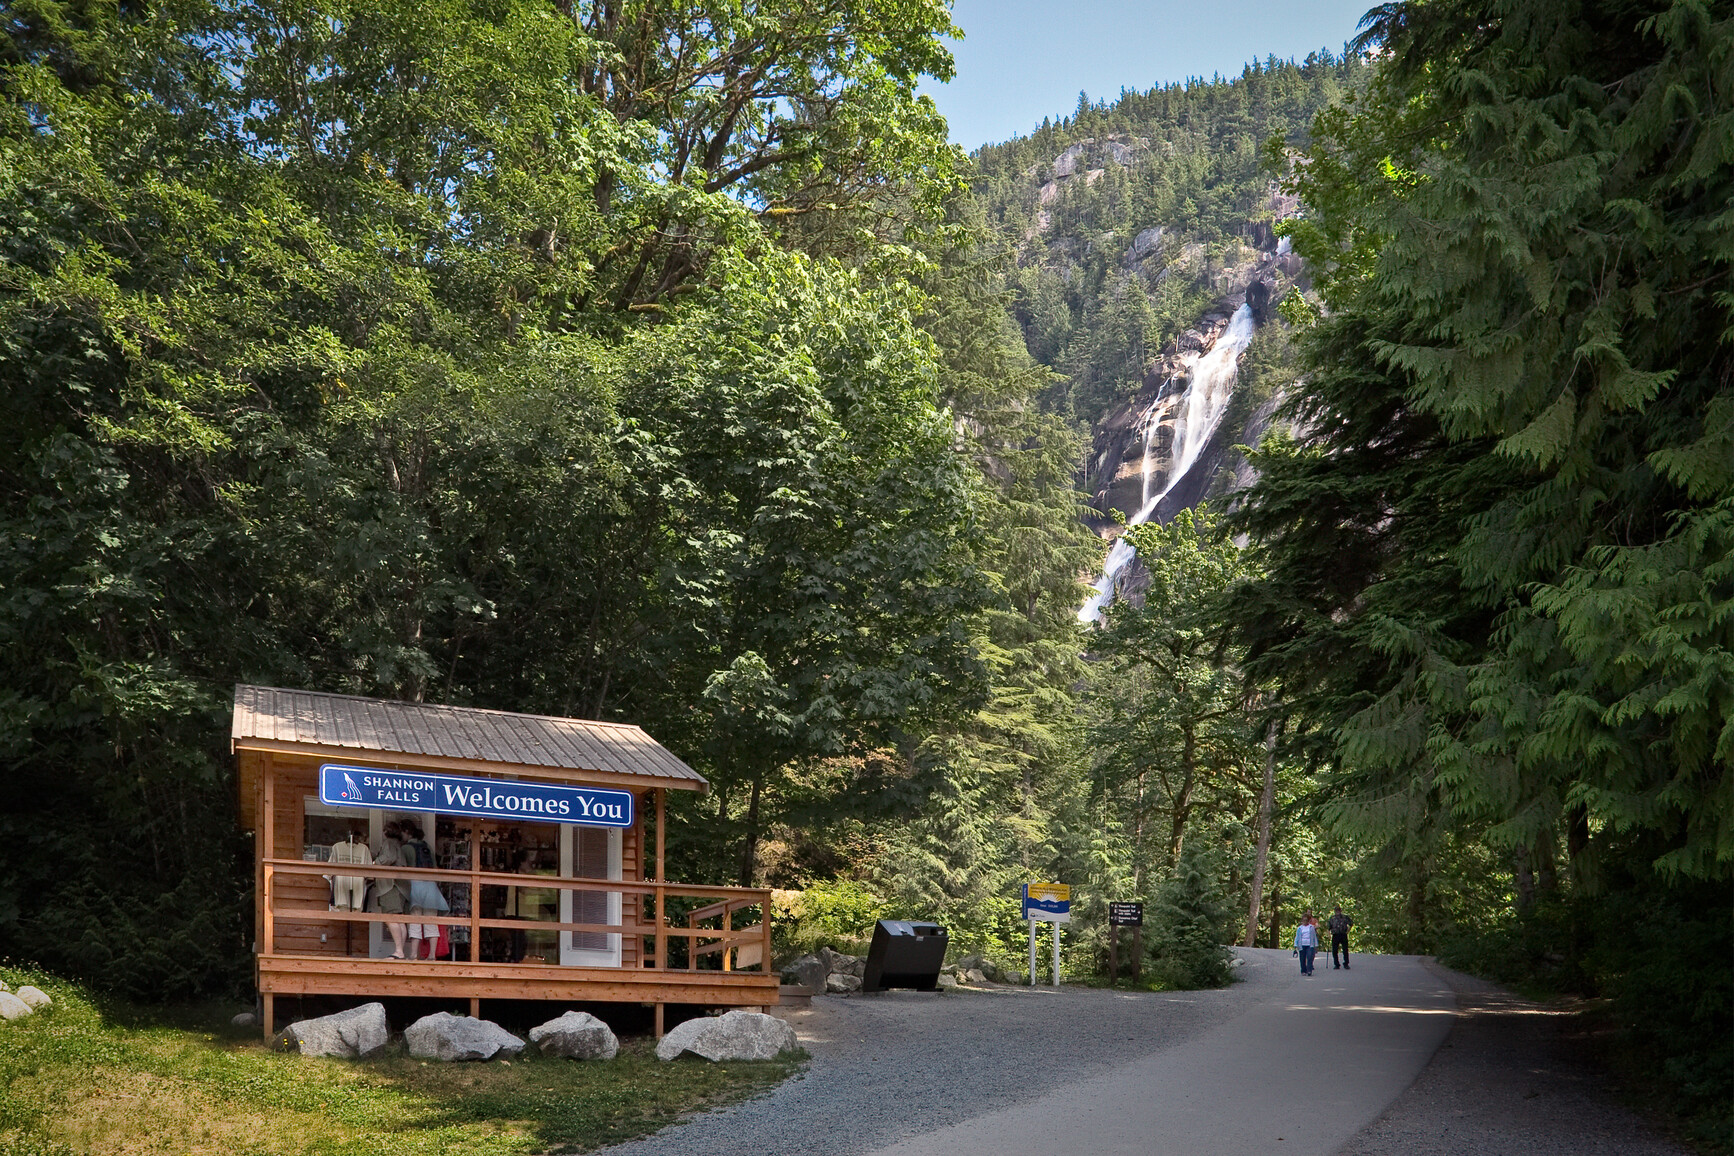 View of falls cascading down the mountain. Park visitors on trail and at kiosk in the foreground.